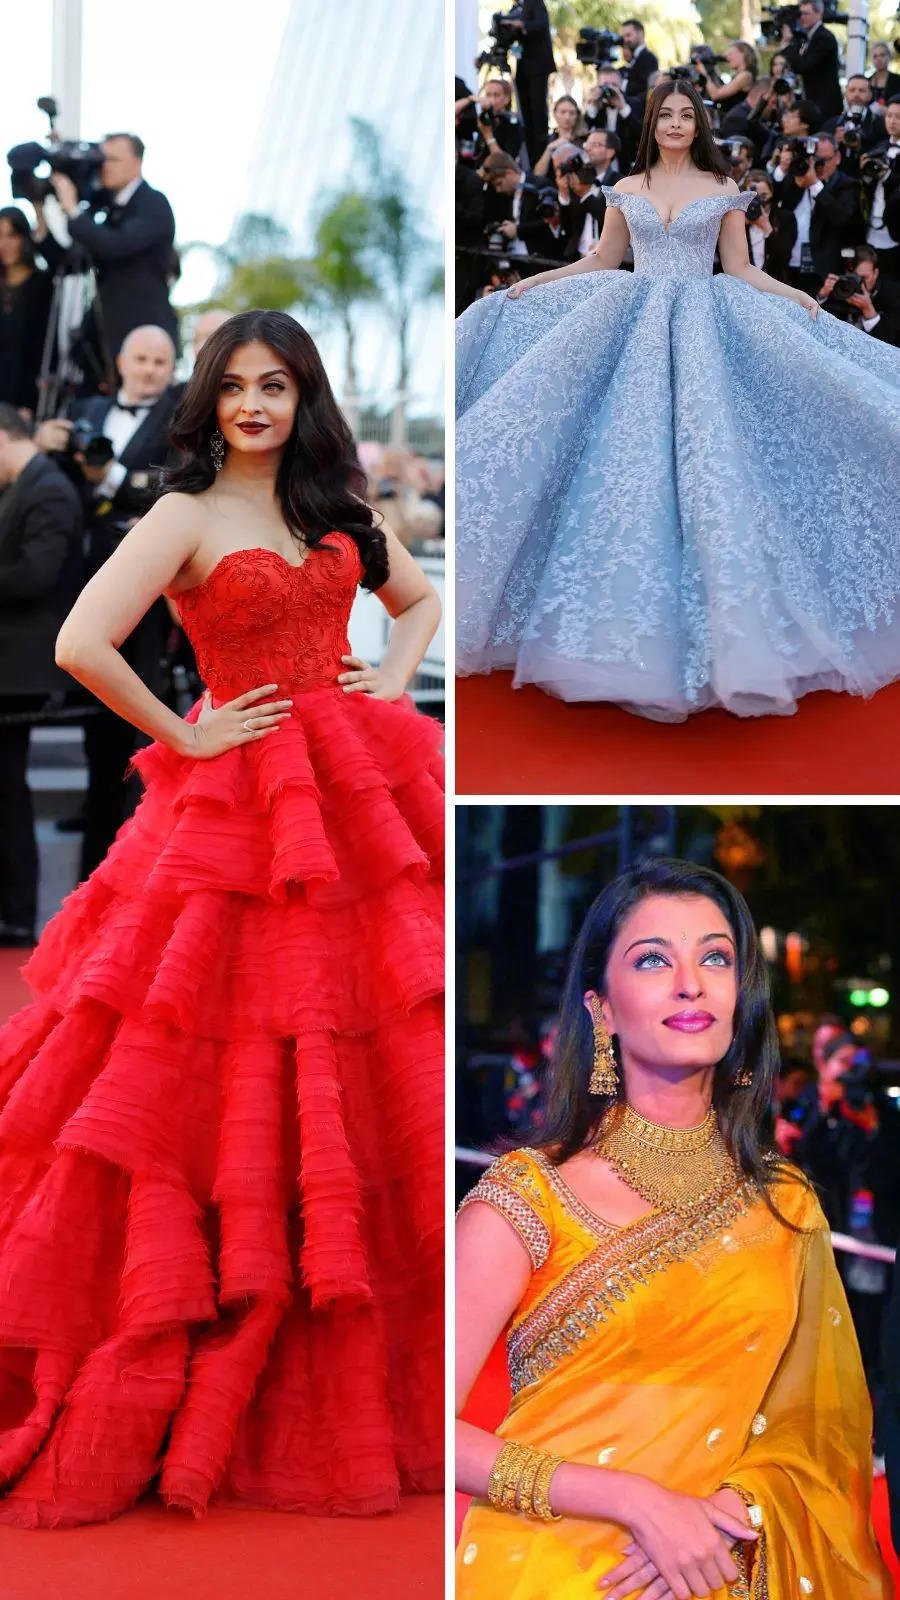 Aishwarya Rai Bachchan is queen of the Cannes Film Festival red carpet